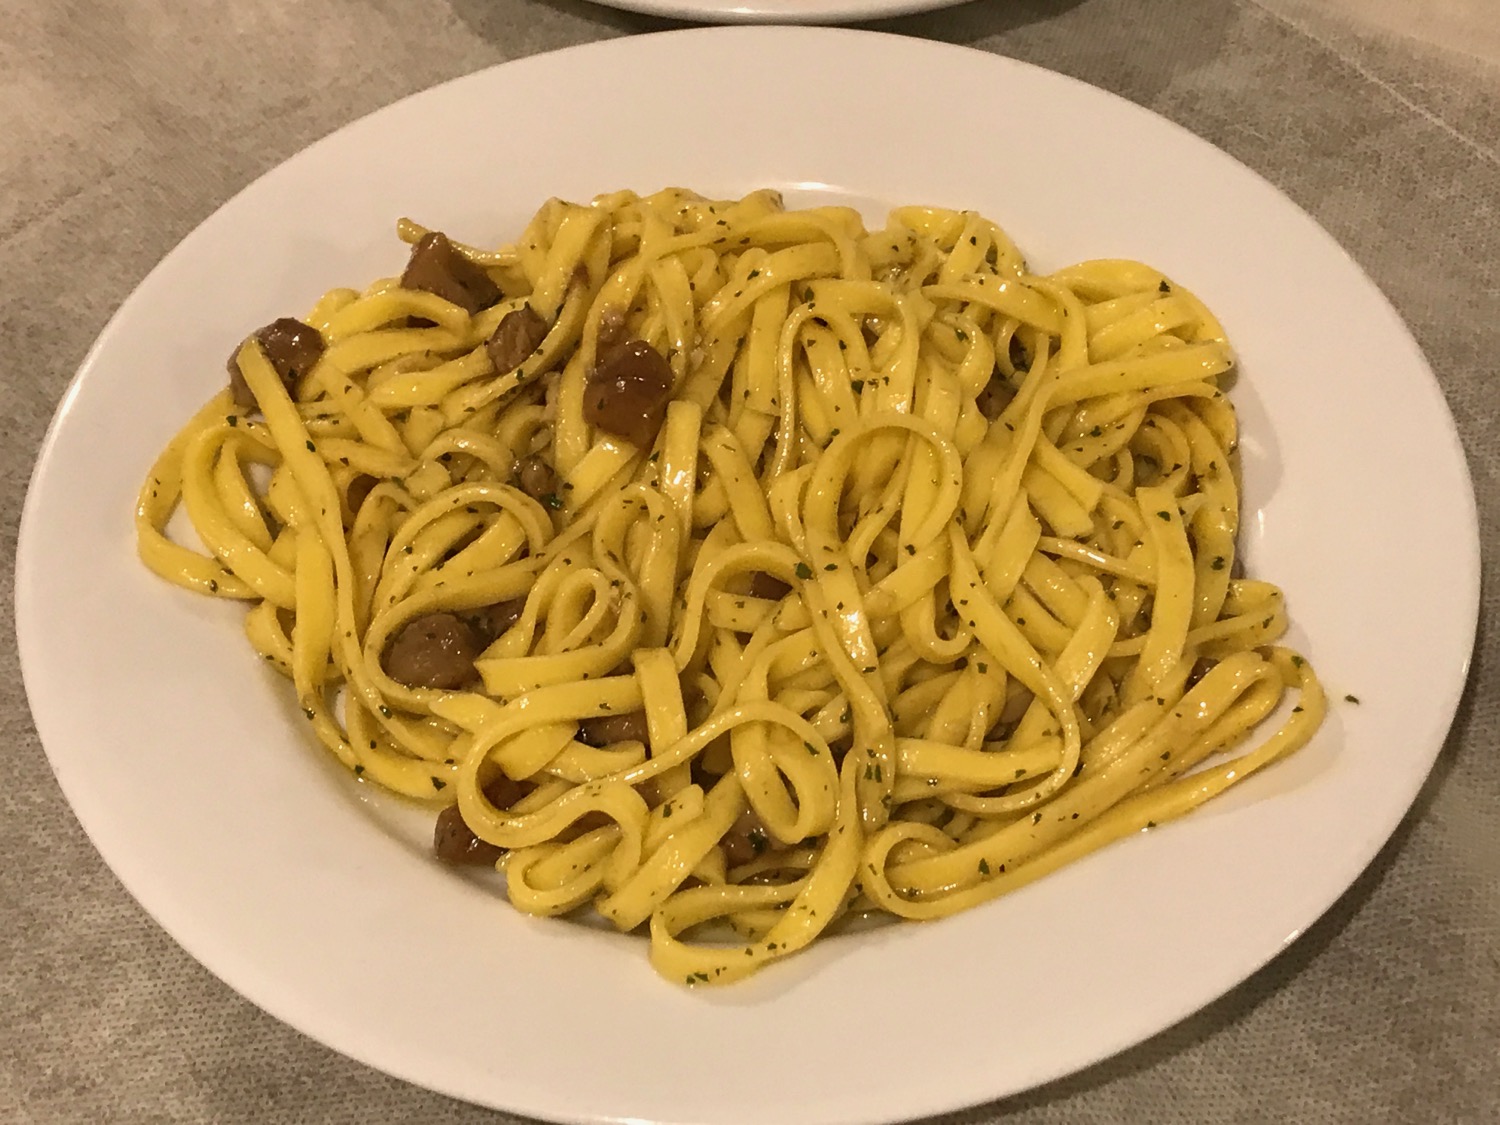 a plate of noodles on a table